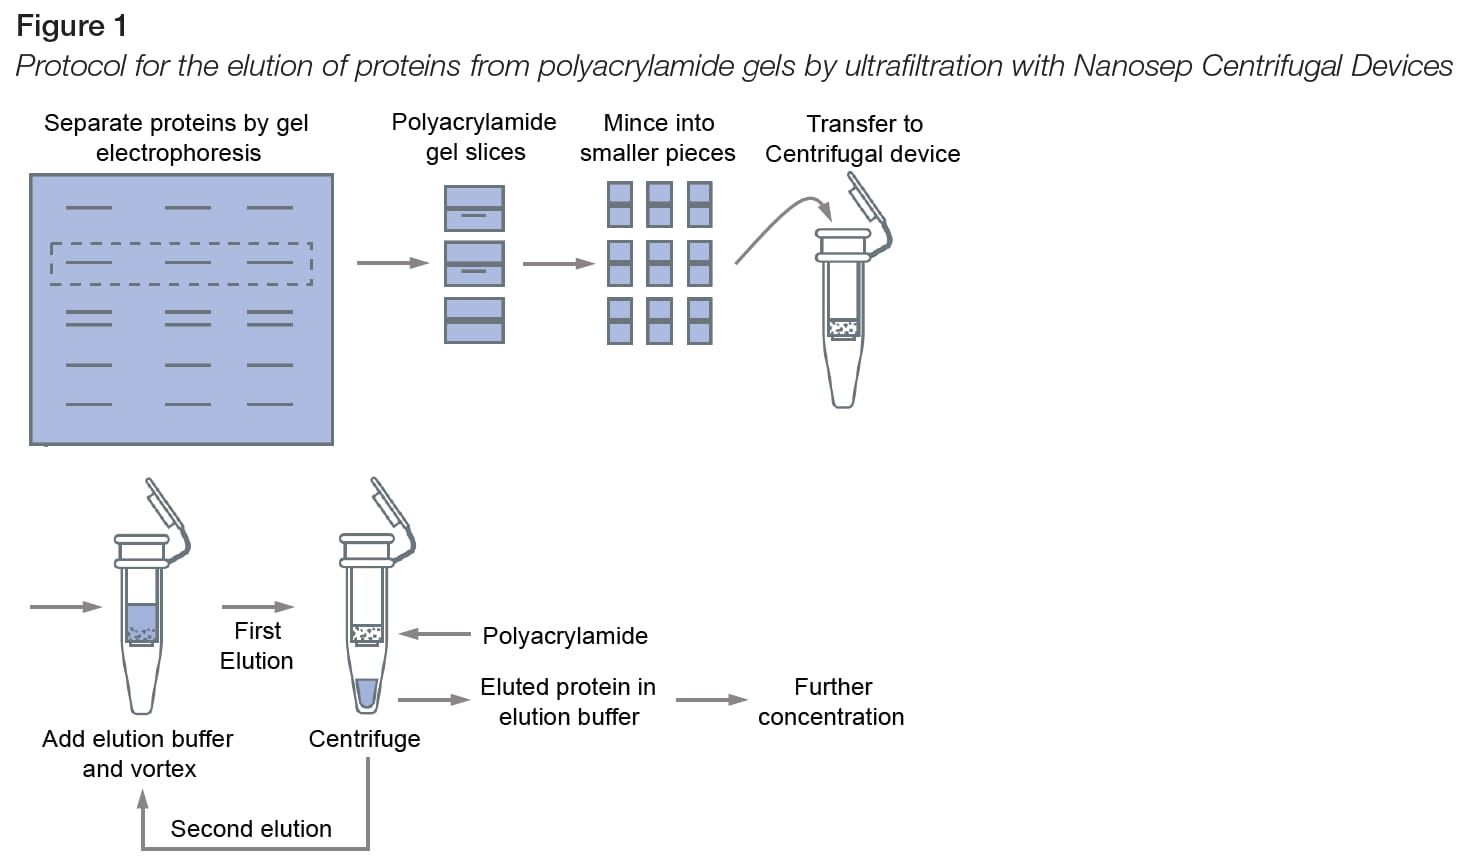 Figure of the protocol for the elution of proteins